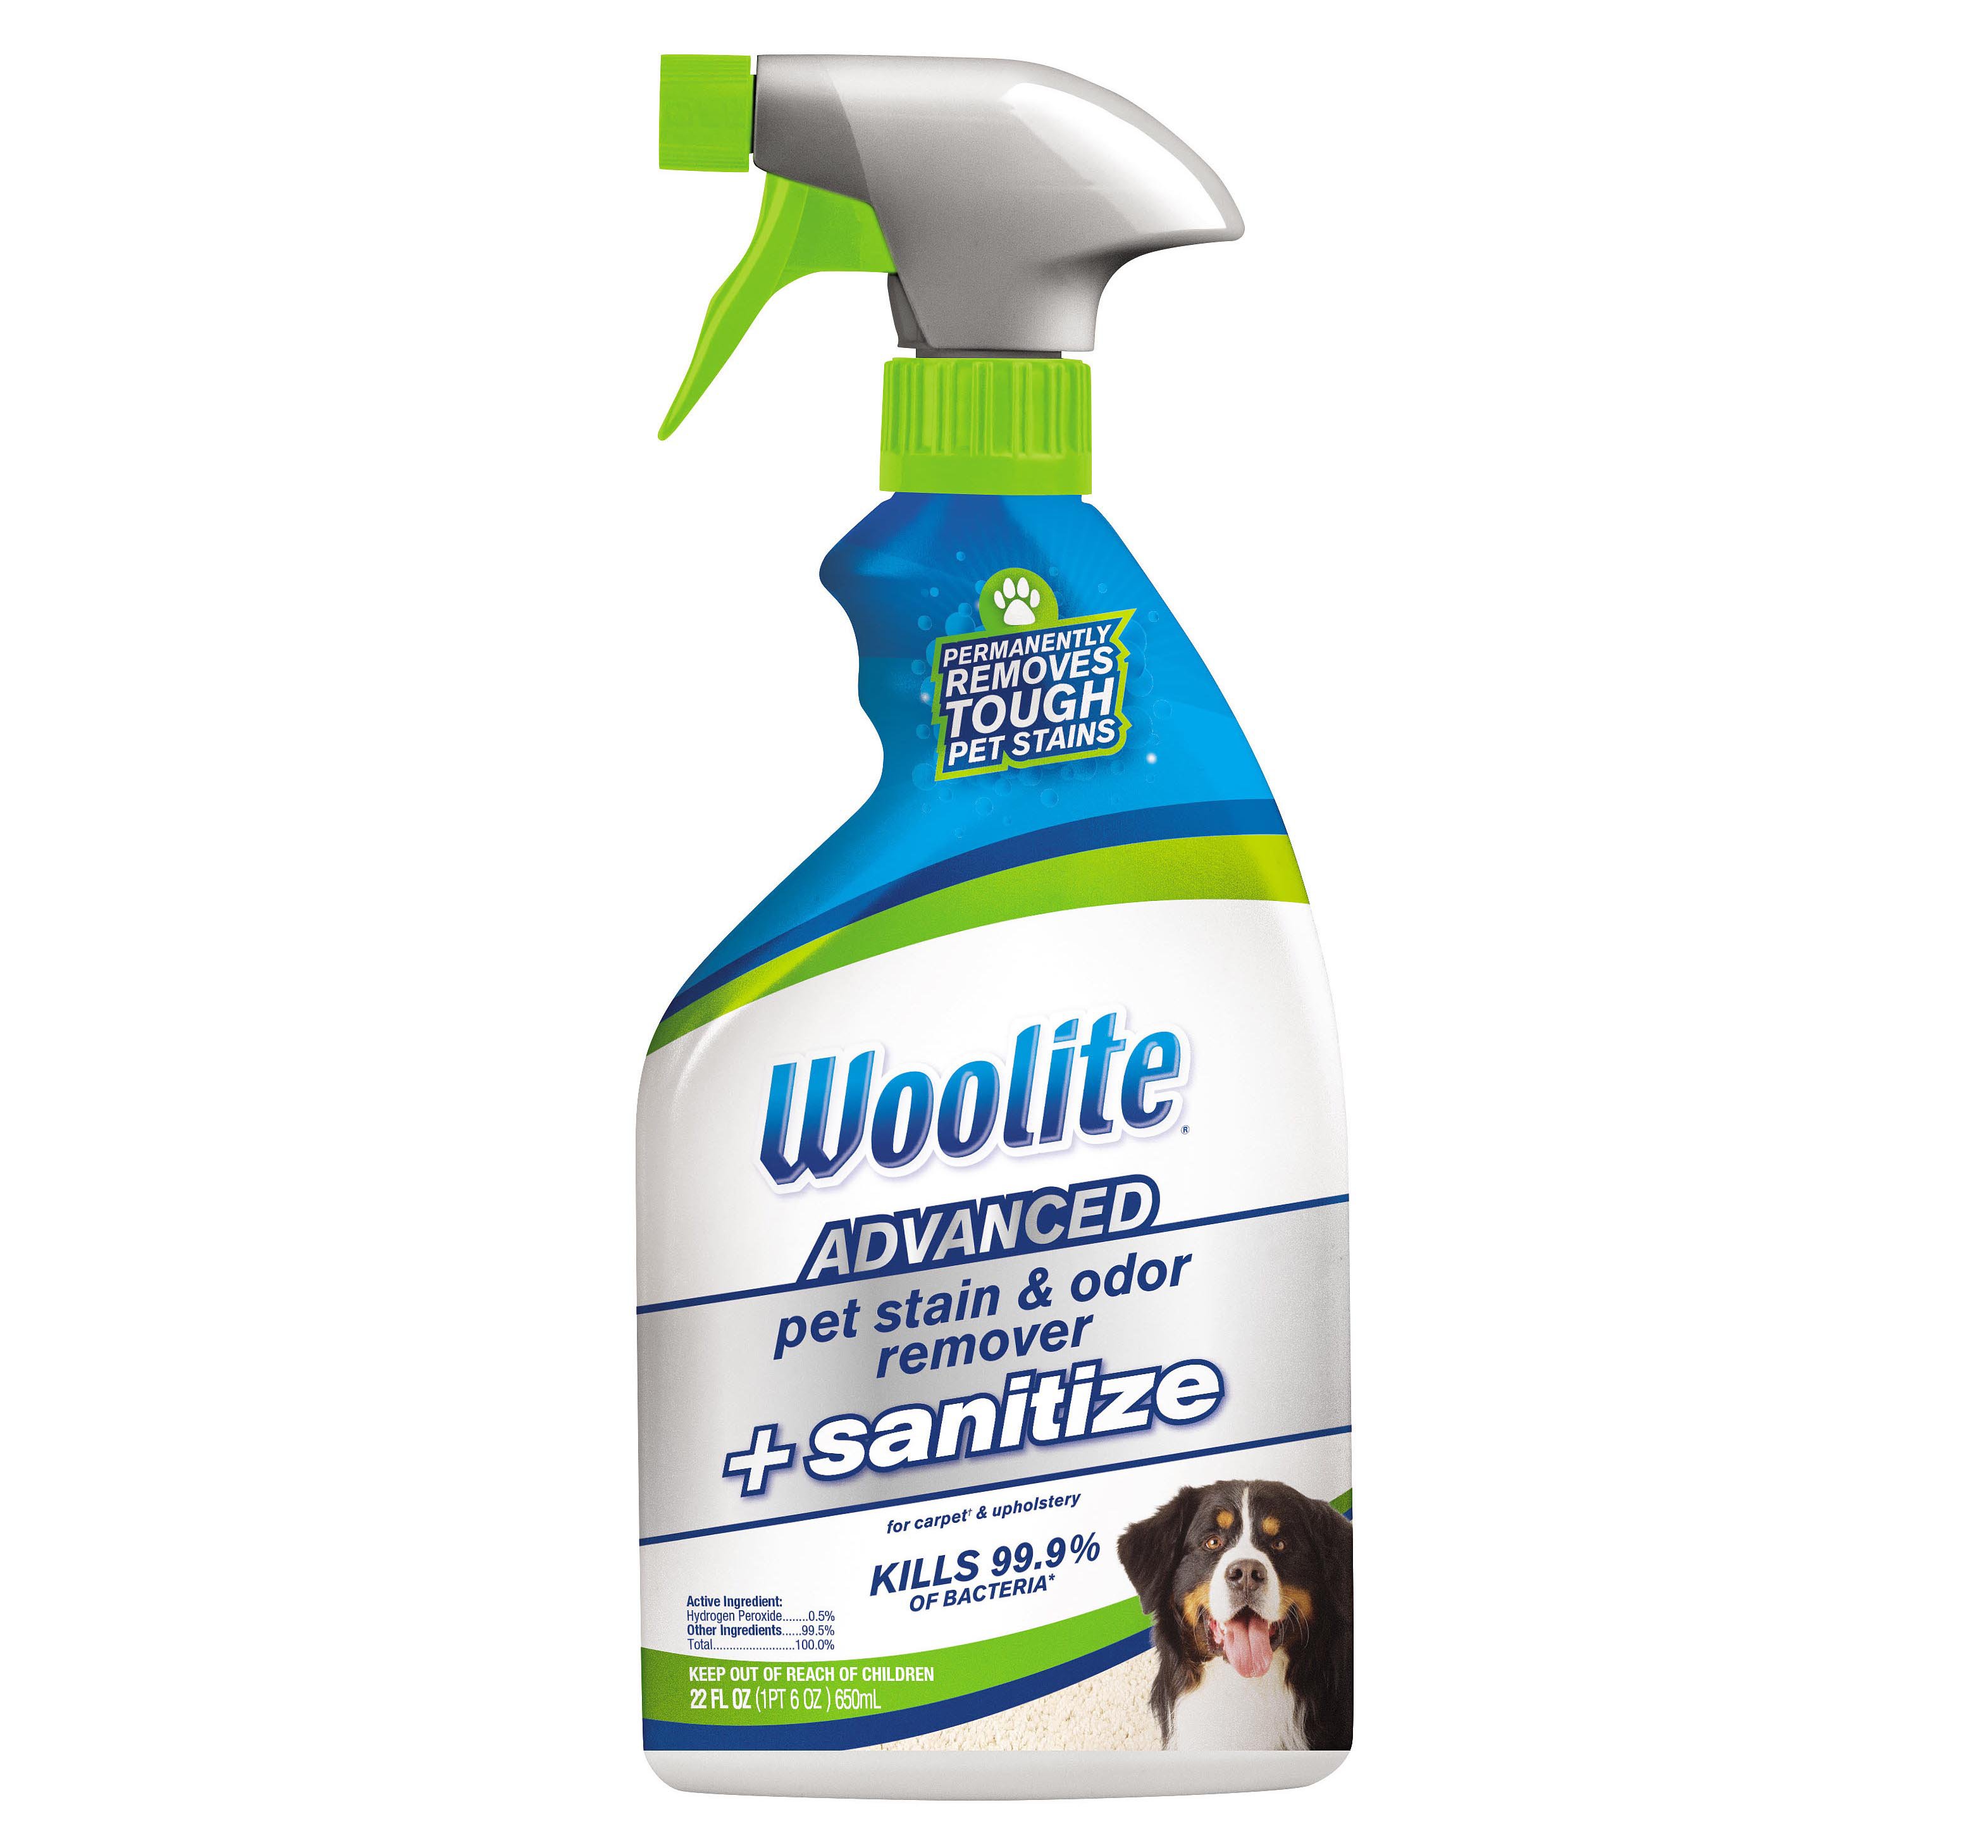 WOOLITE Oxy-deep Carpet Stain Remover Great for pet messes 8538